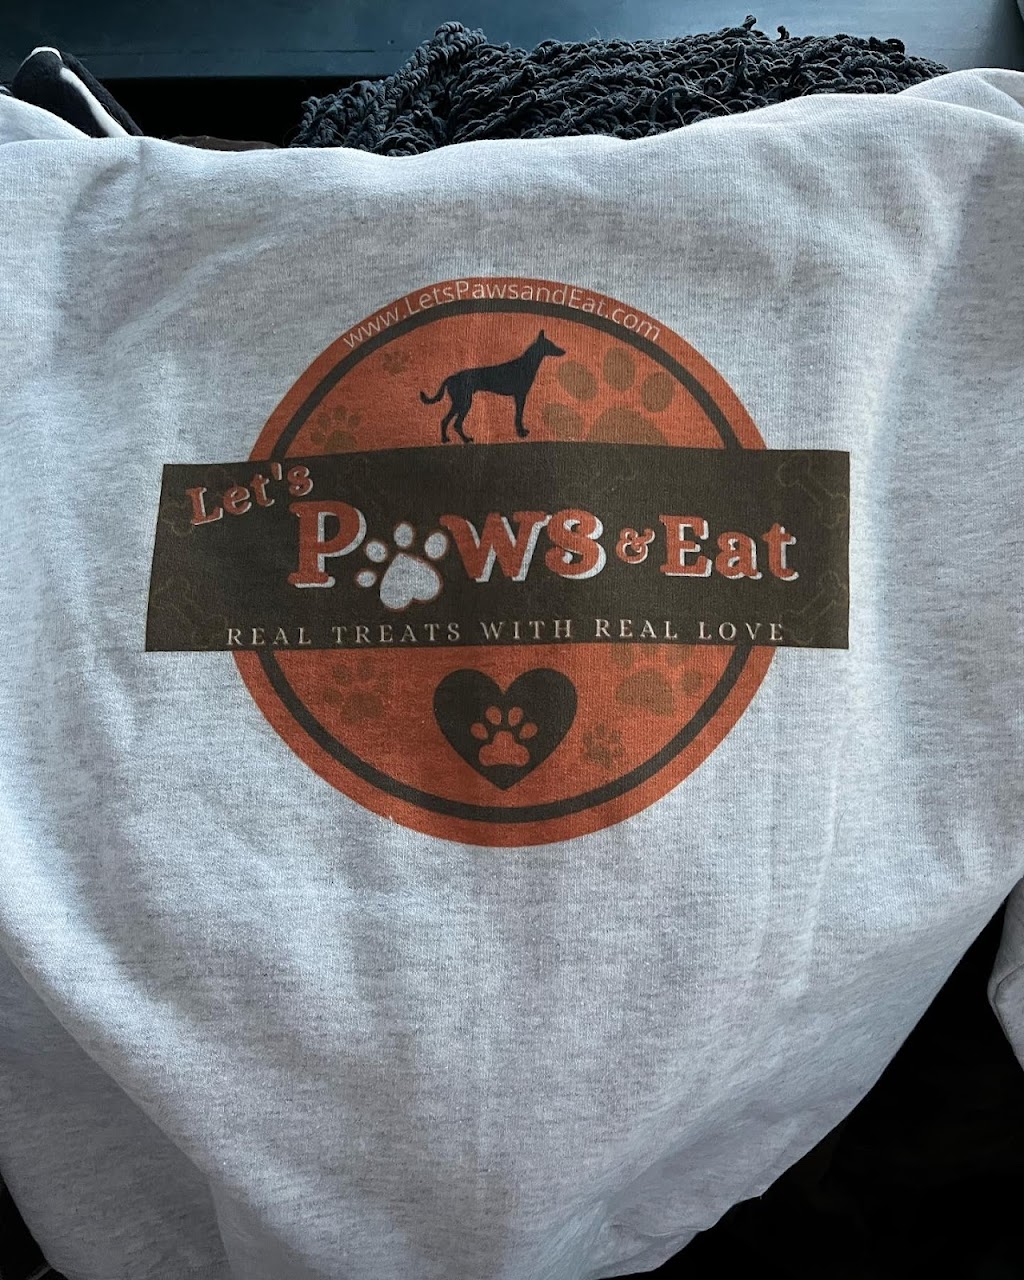 Lets Paws & Eat | 645 Goodwin St, East Hartford, CT 06108 | Phone: (203) 927-4613